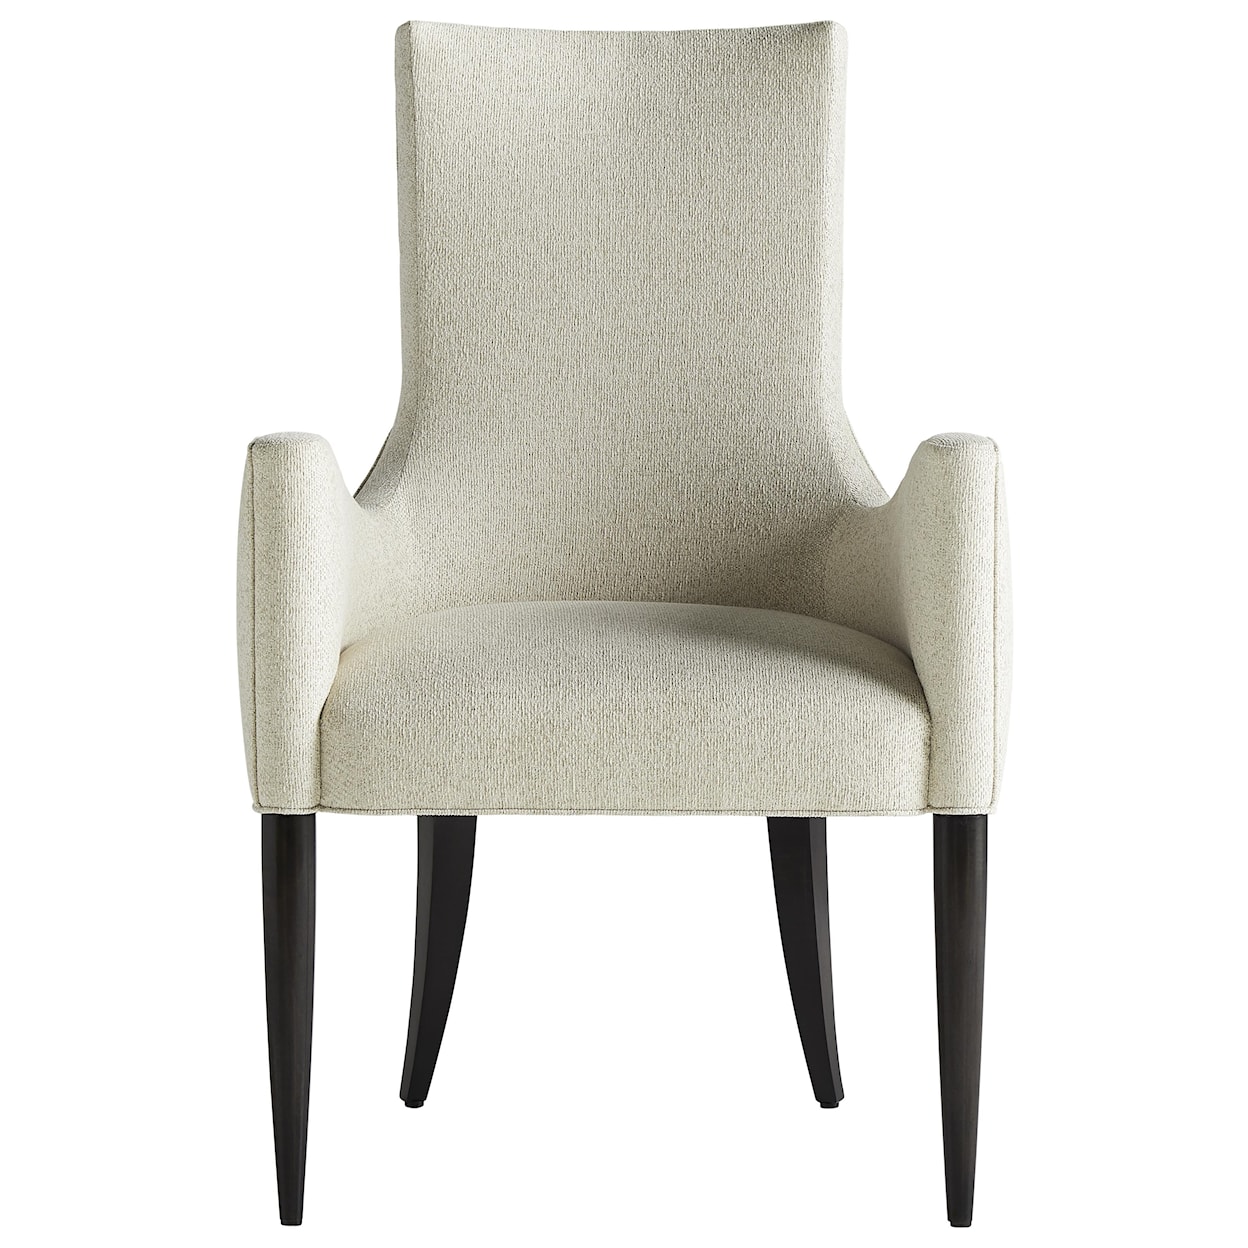 Vanguard Furniture Lillet Leather  Arm Chair